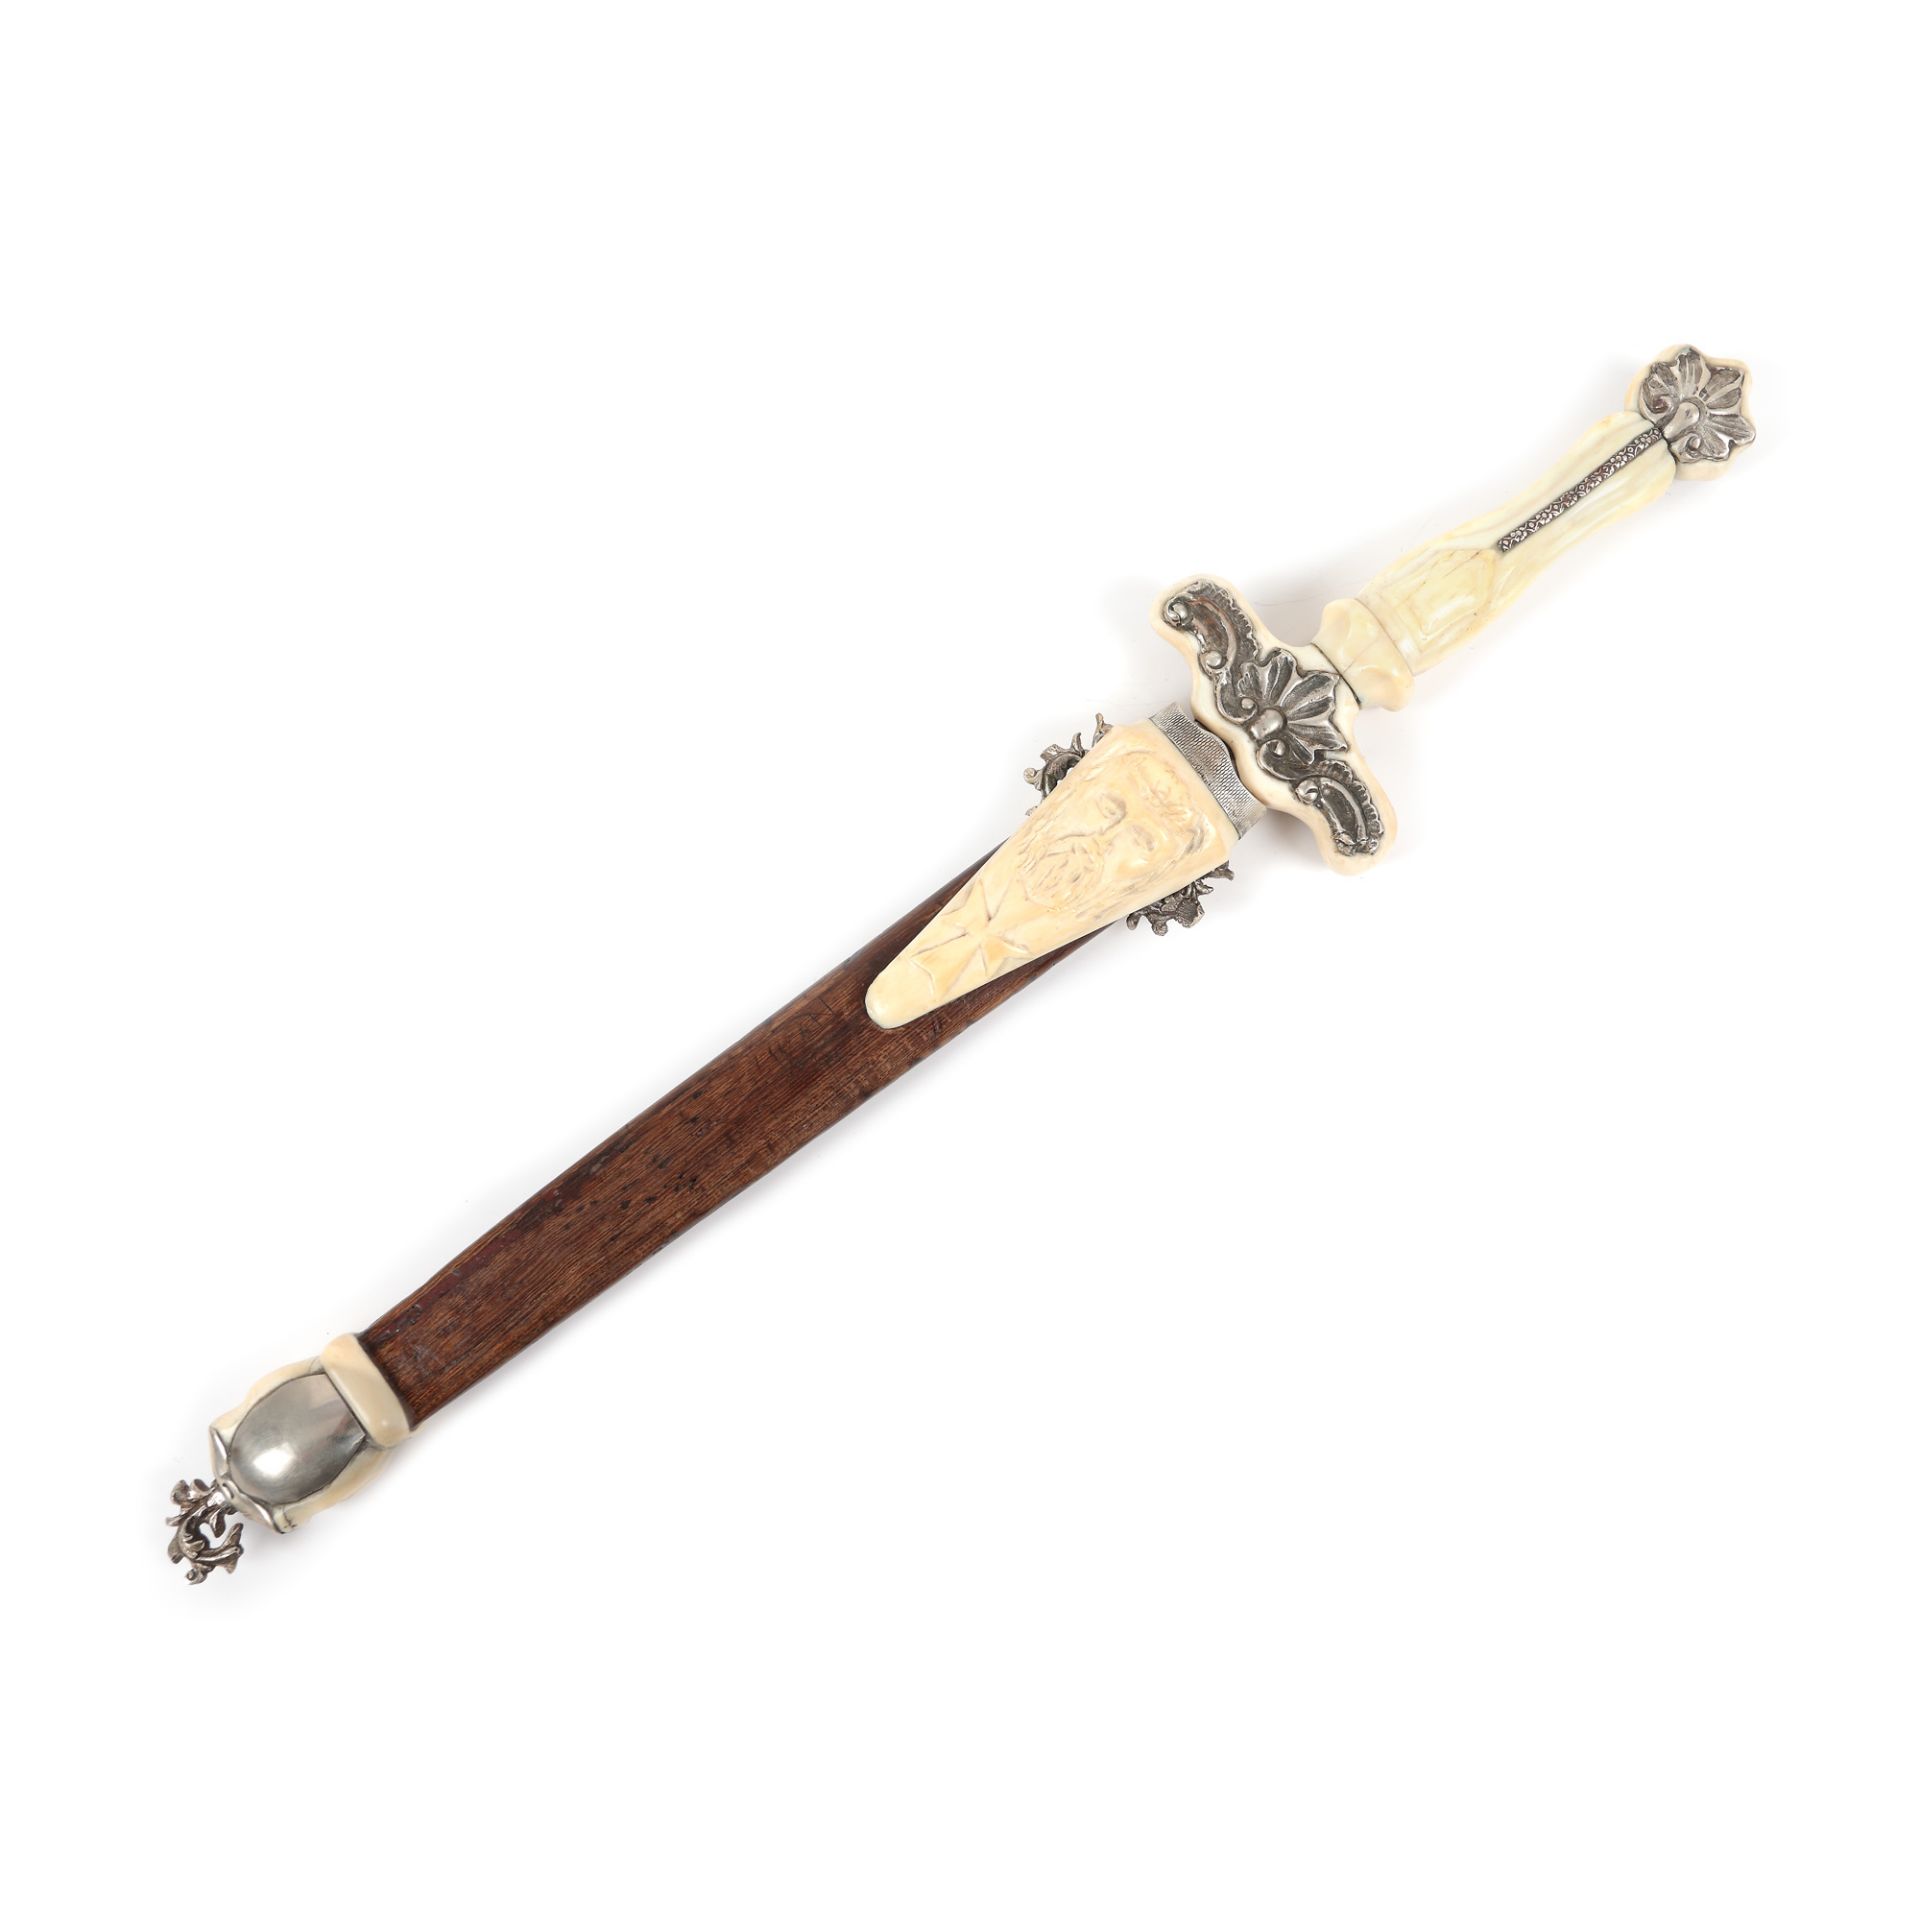 Ceremonial dagger, handle and sheath decorated with silver and ivory, bearing the Cross of Malta and